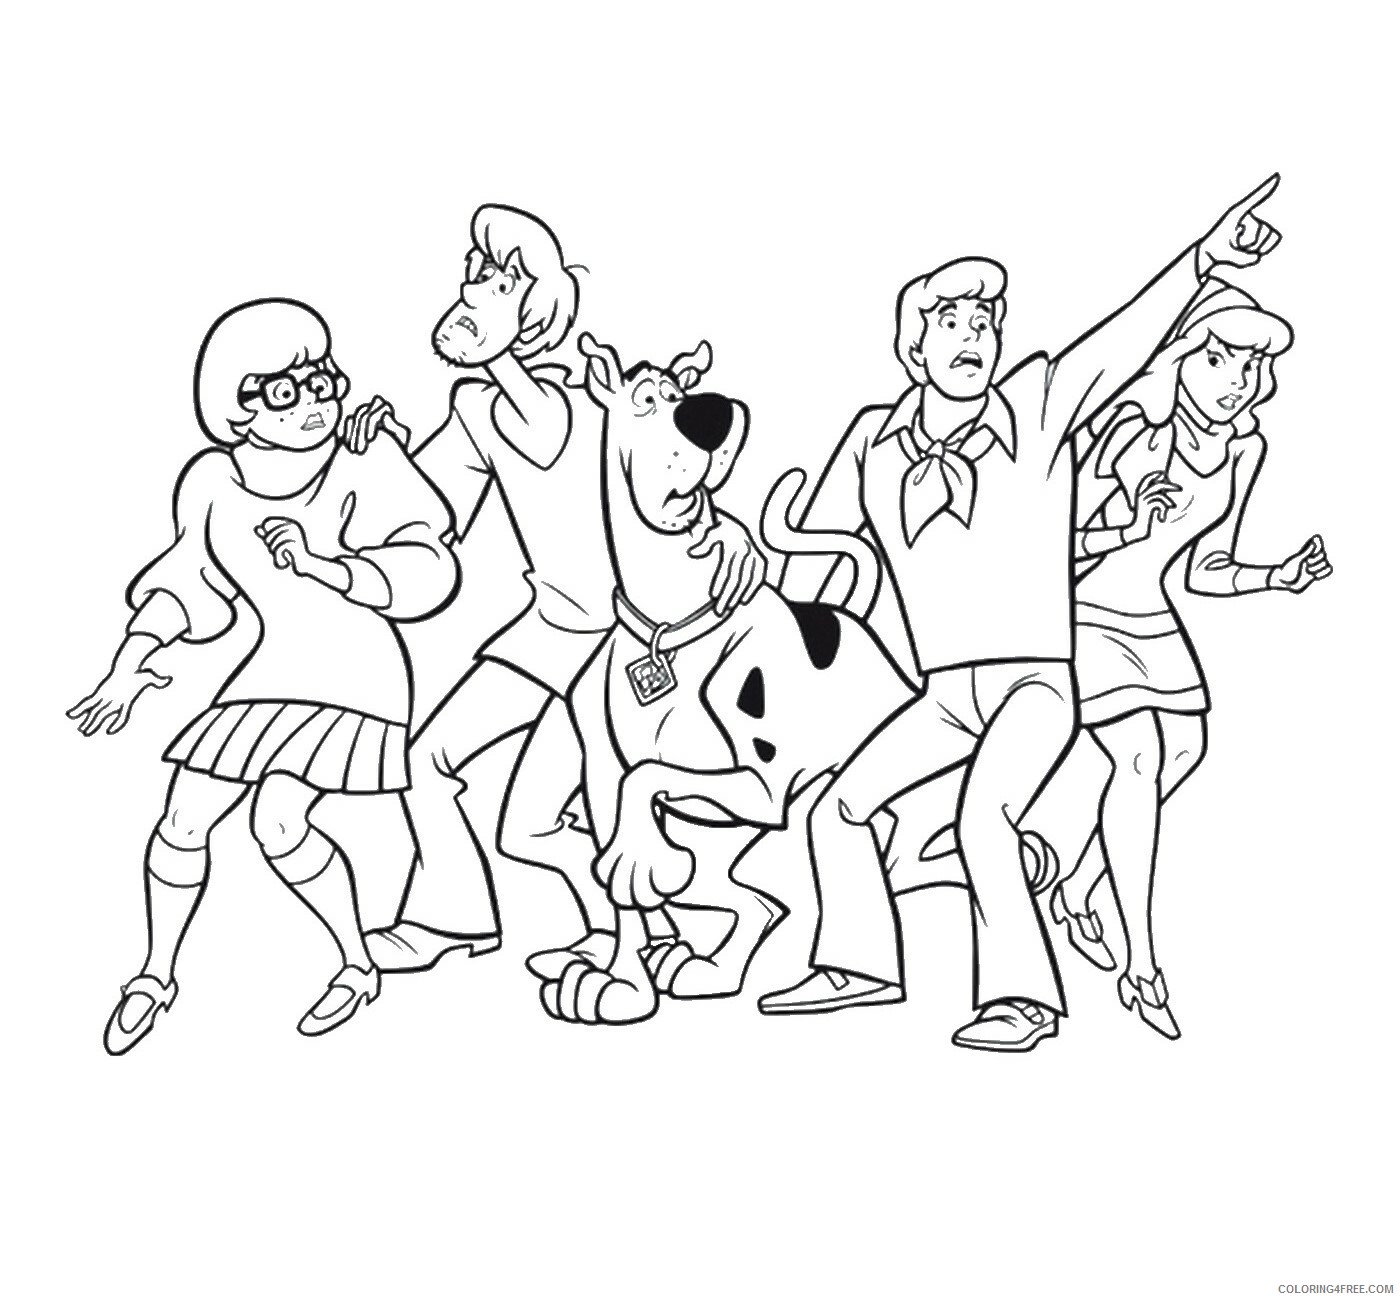 Scooby Doo Coloring Pages TV Film scooby_doo_cl_35 Printable 2020 07278 Coloring4free